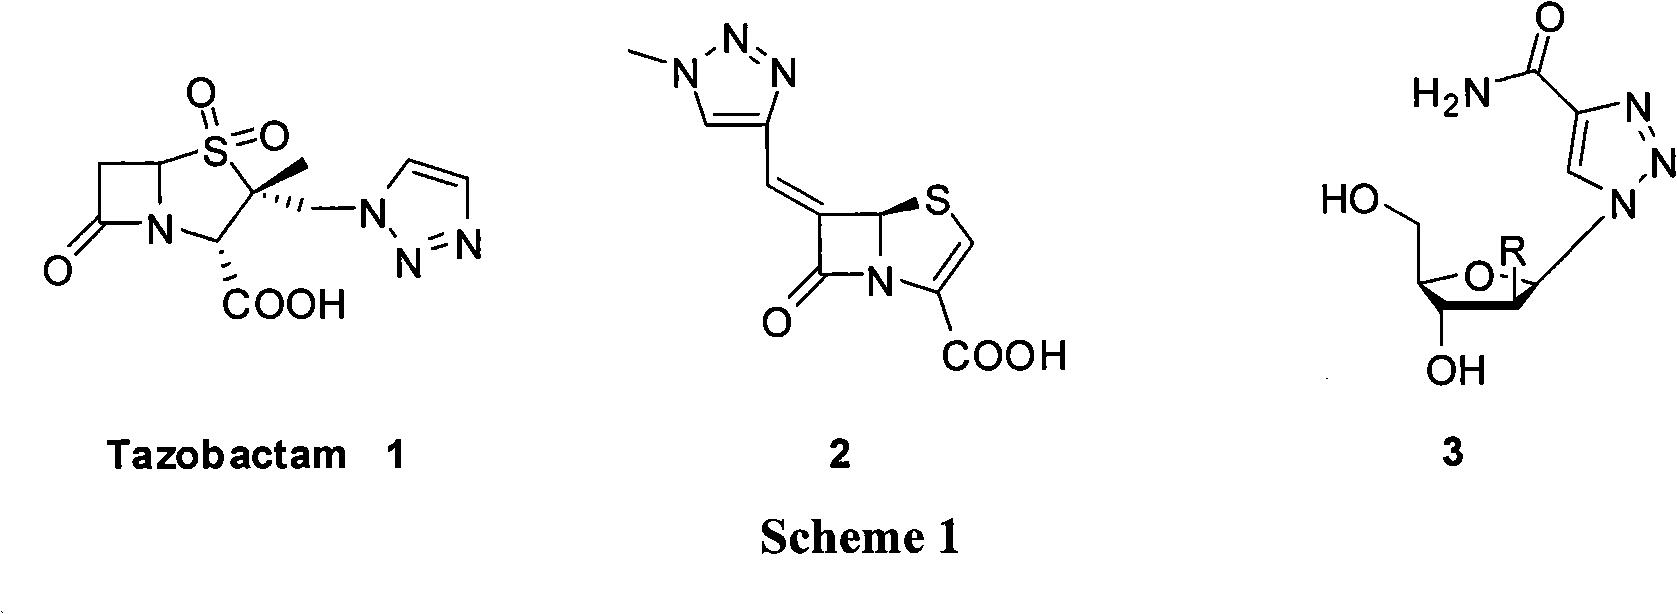 Method for synthesizing 1-substituted-1,2,3-tolyltriazole